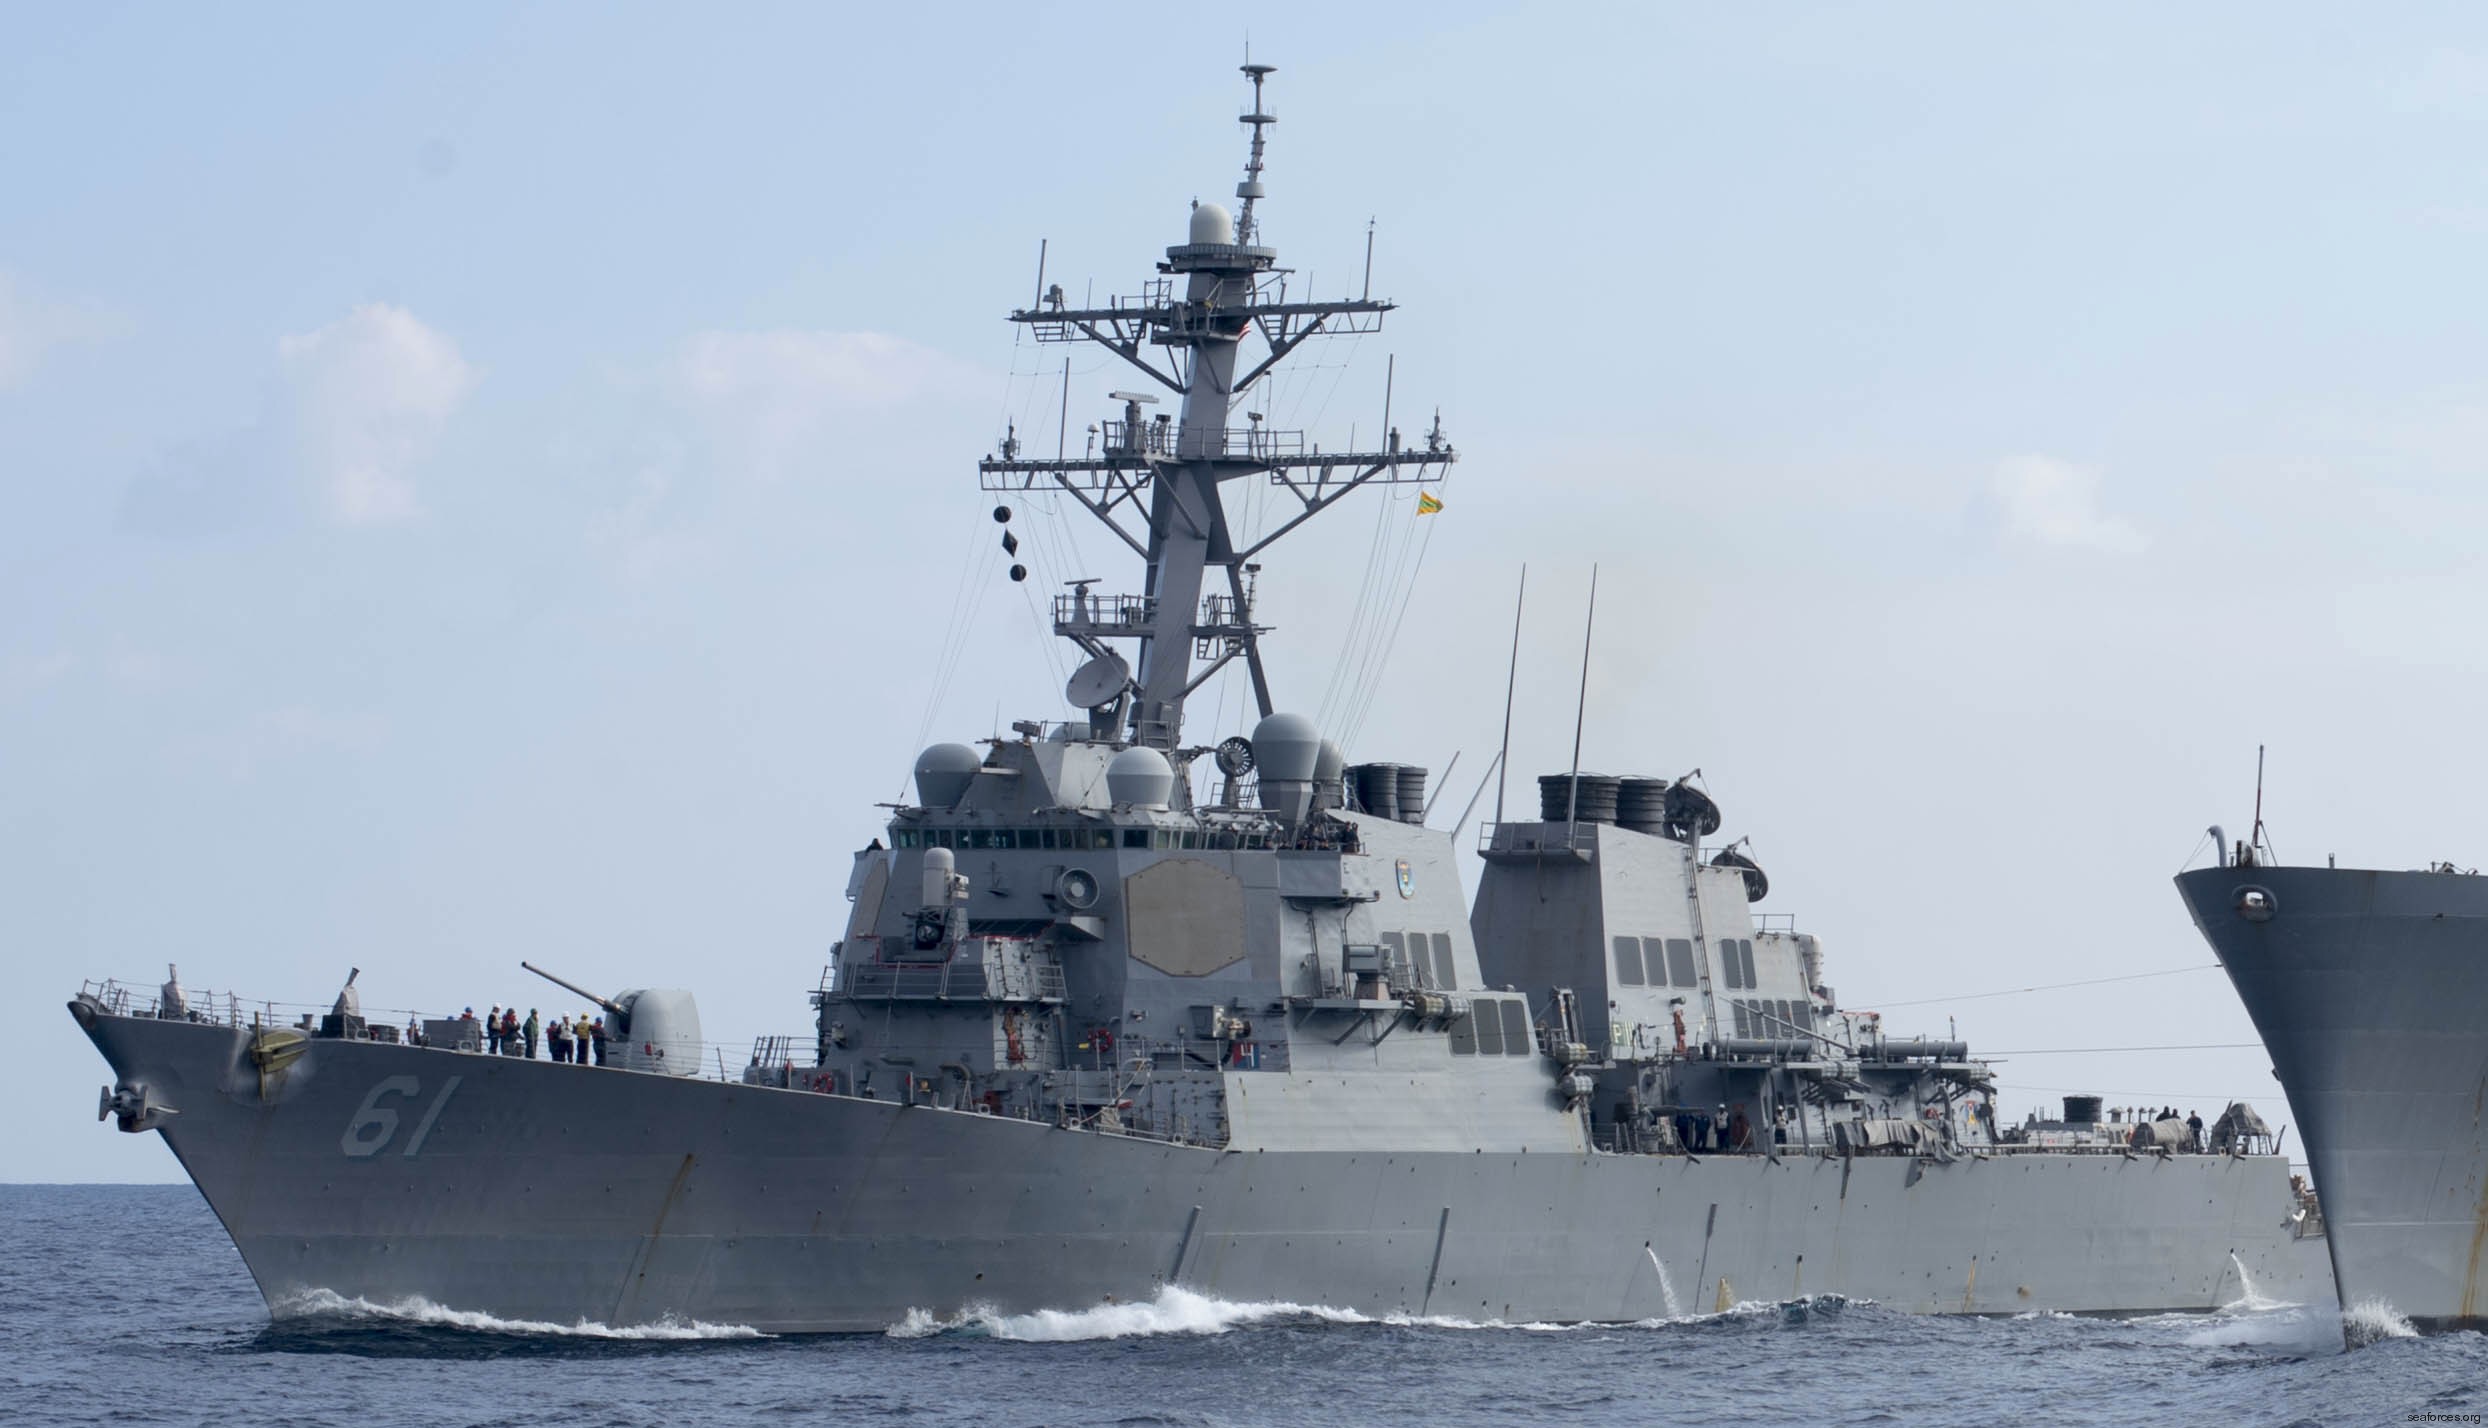 ddg-61 uss ramage guided missile destroyer us navy 93